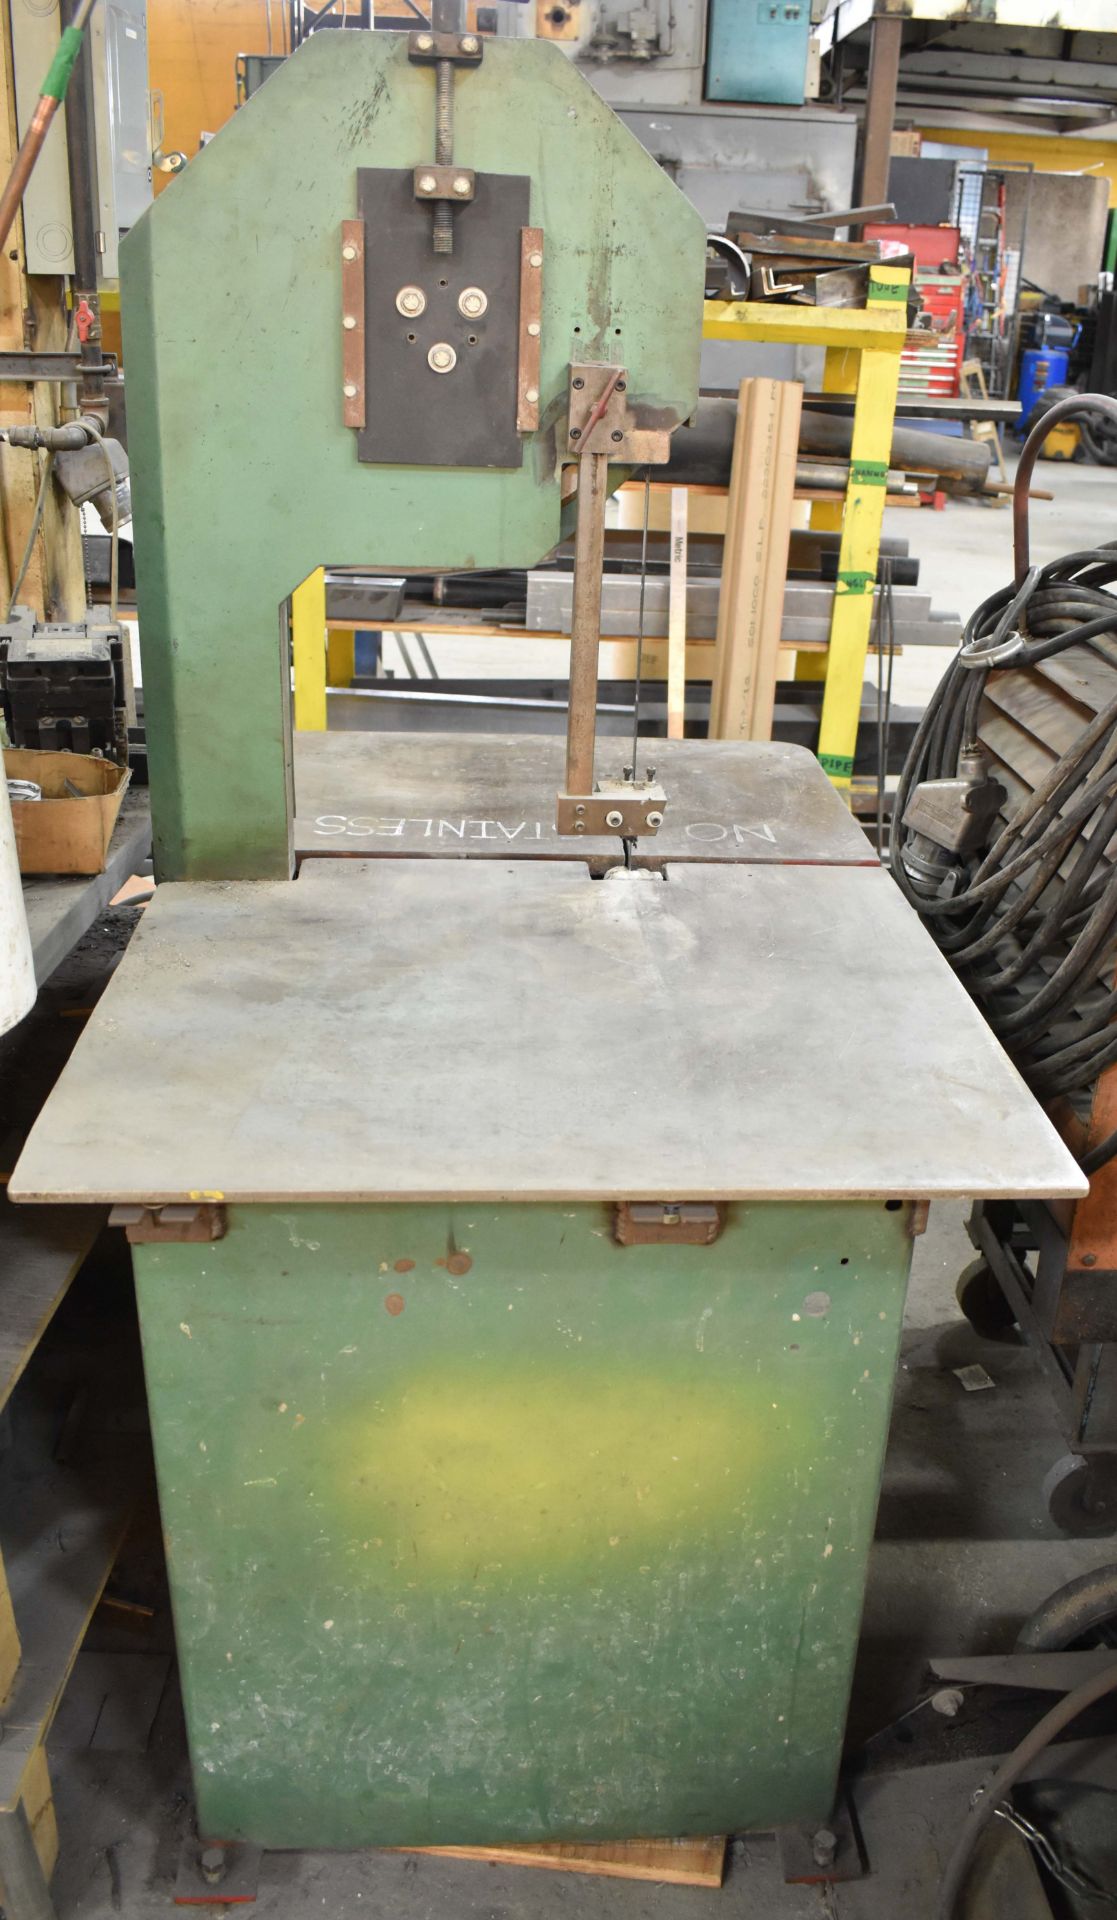 E-R MAIER KM1012 VERTICAL BAND SAW WITH 44.5"X30" TABLE, 14" THROAT, 16.5" MAX. WORKPIECE HEIGHT, - Image 2 of 3